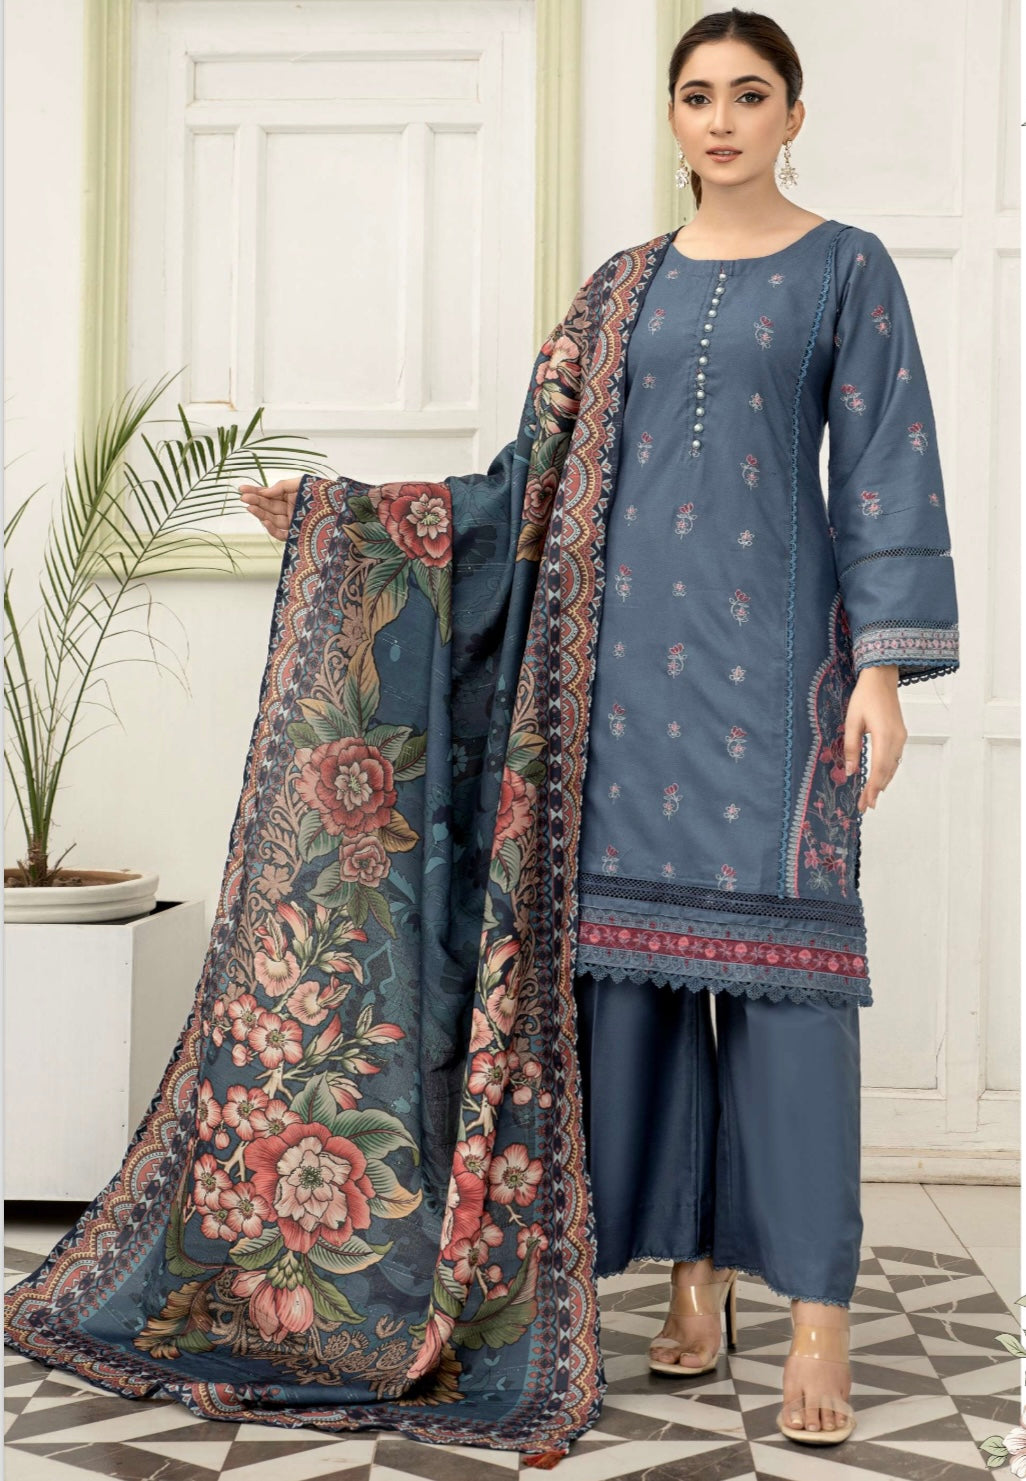 SIMRANS MAHI Dhanak Embroidered 3 Piece Winter Outfit With Shawl MSH06